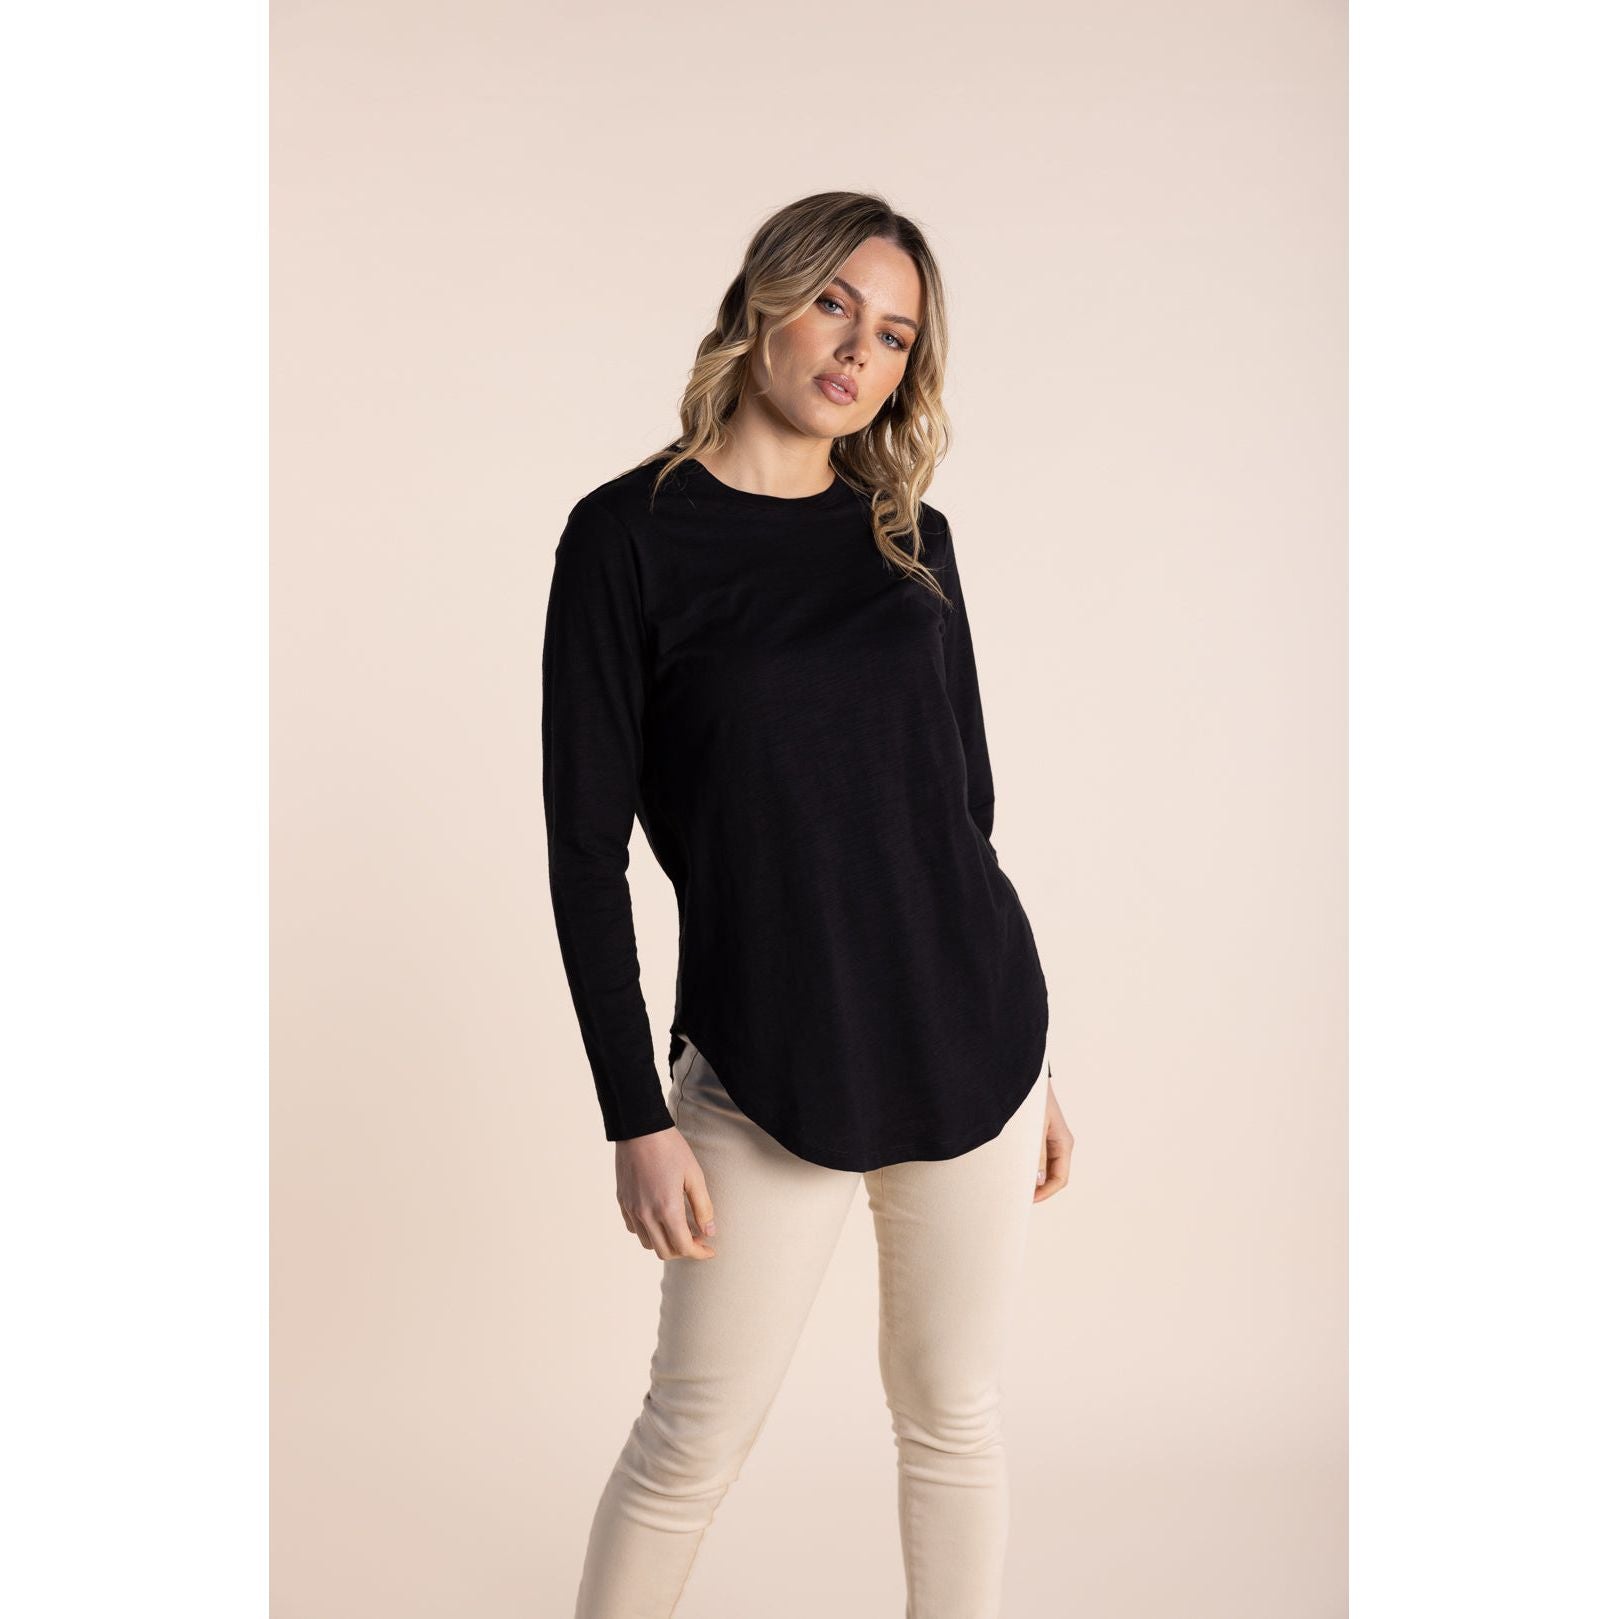 Two T's - Long Sleeve Crew T-Shirt Black